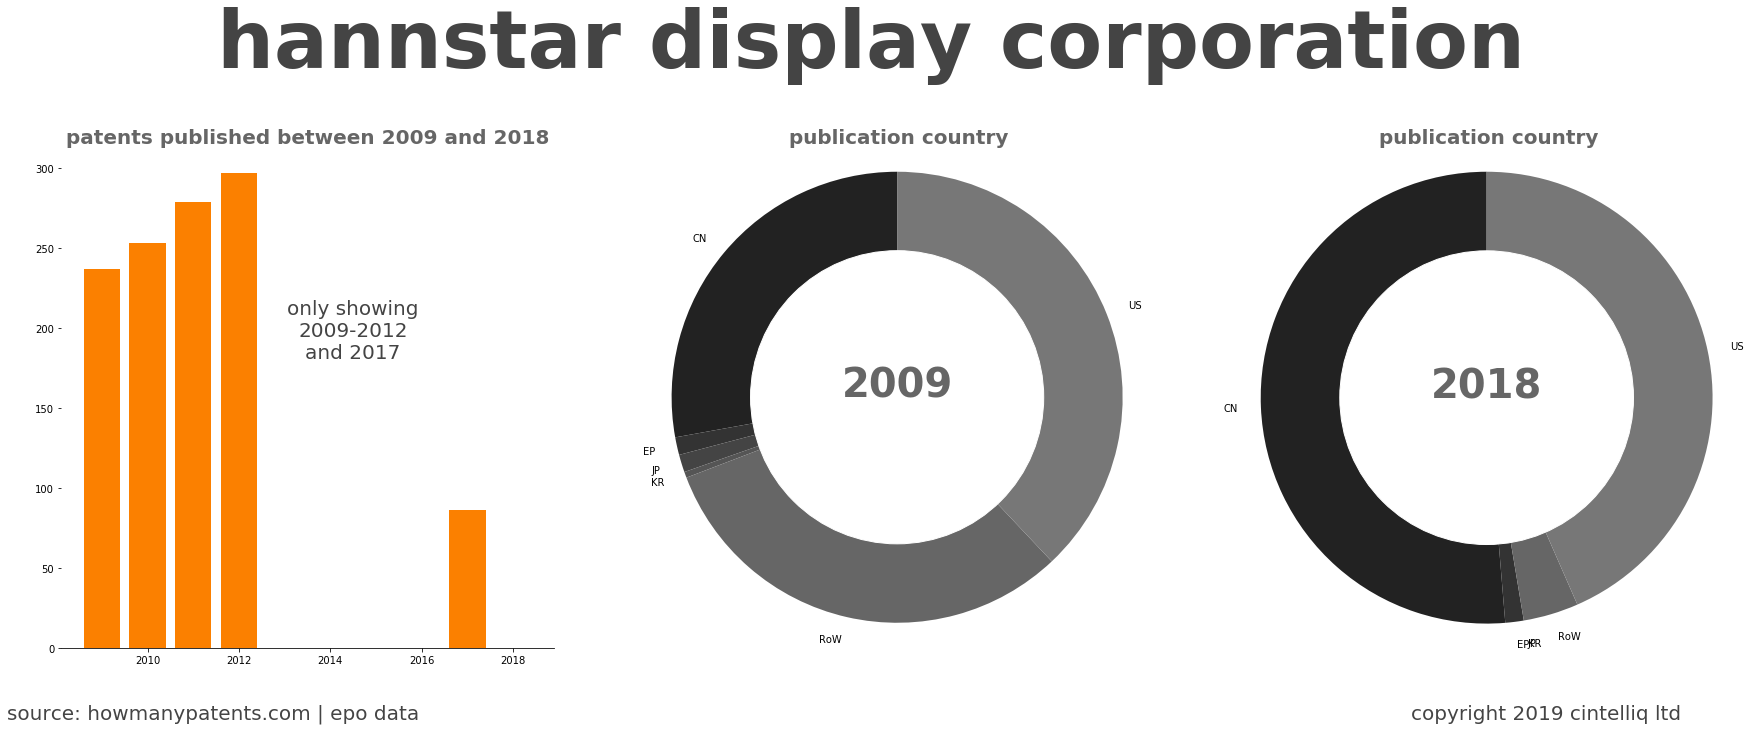 summary of patents for Hannstar Display Corporation